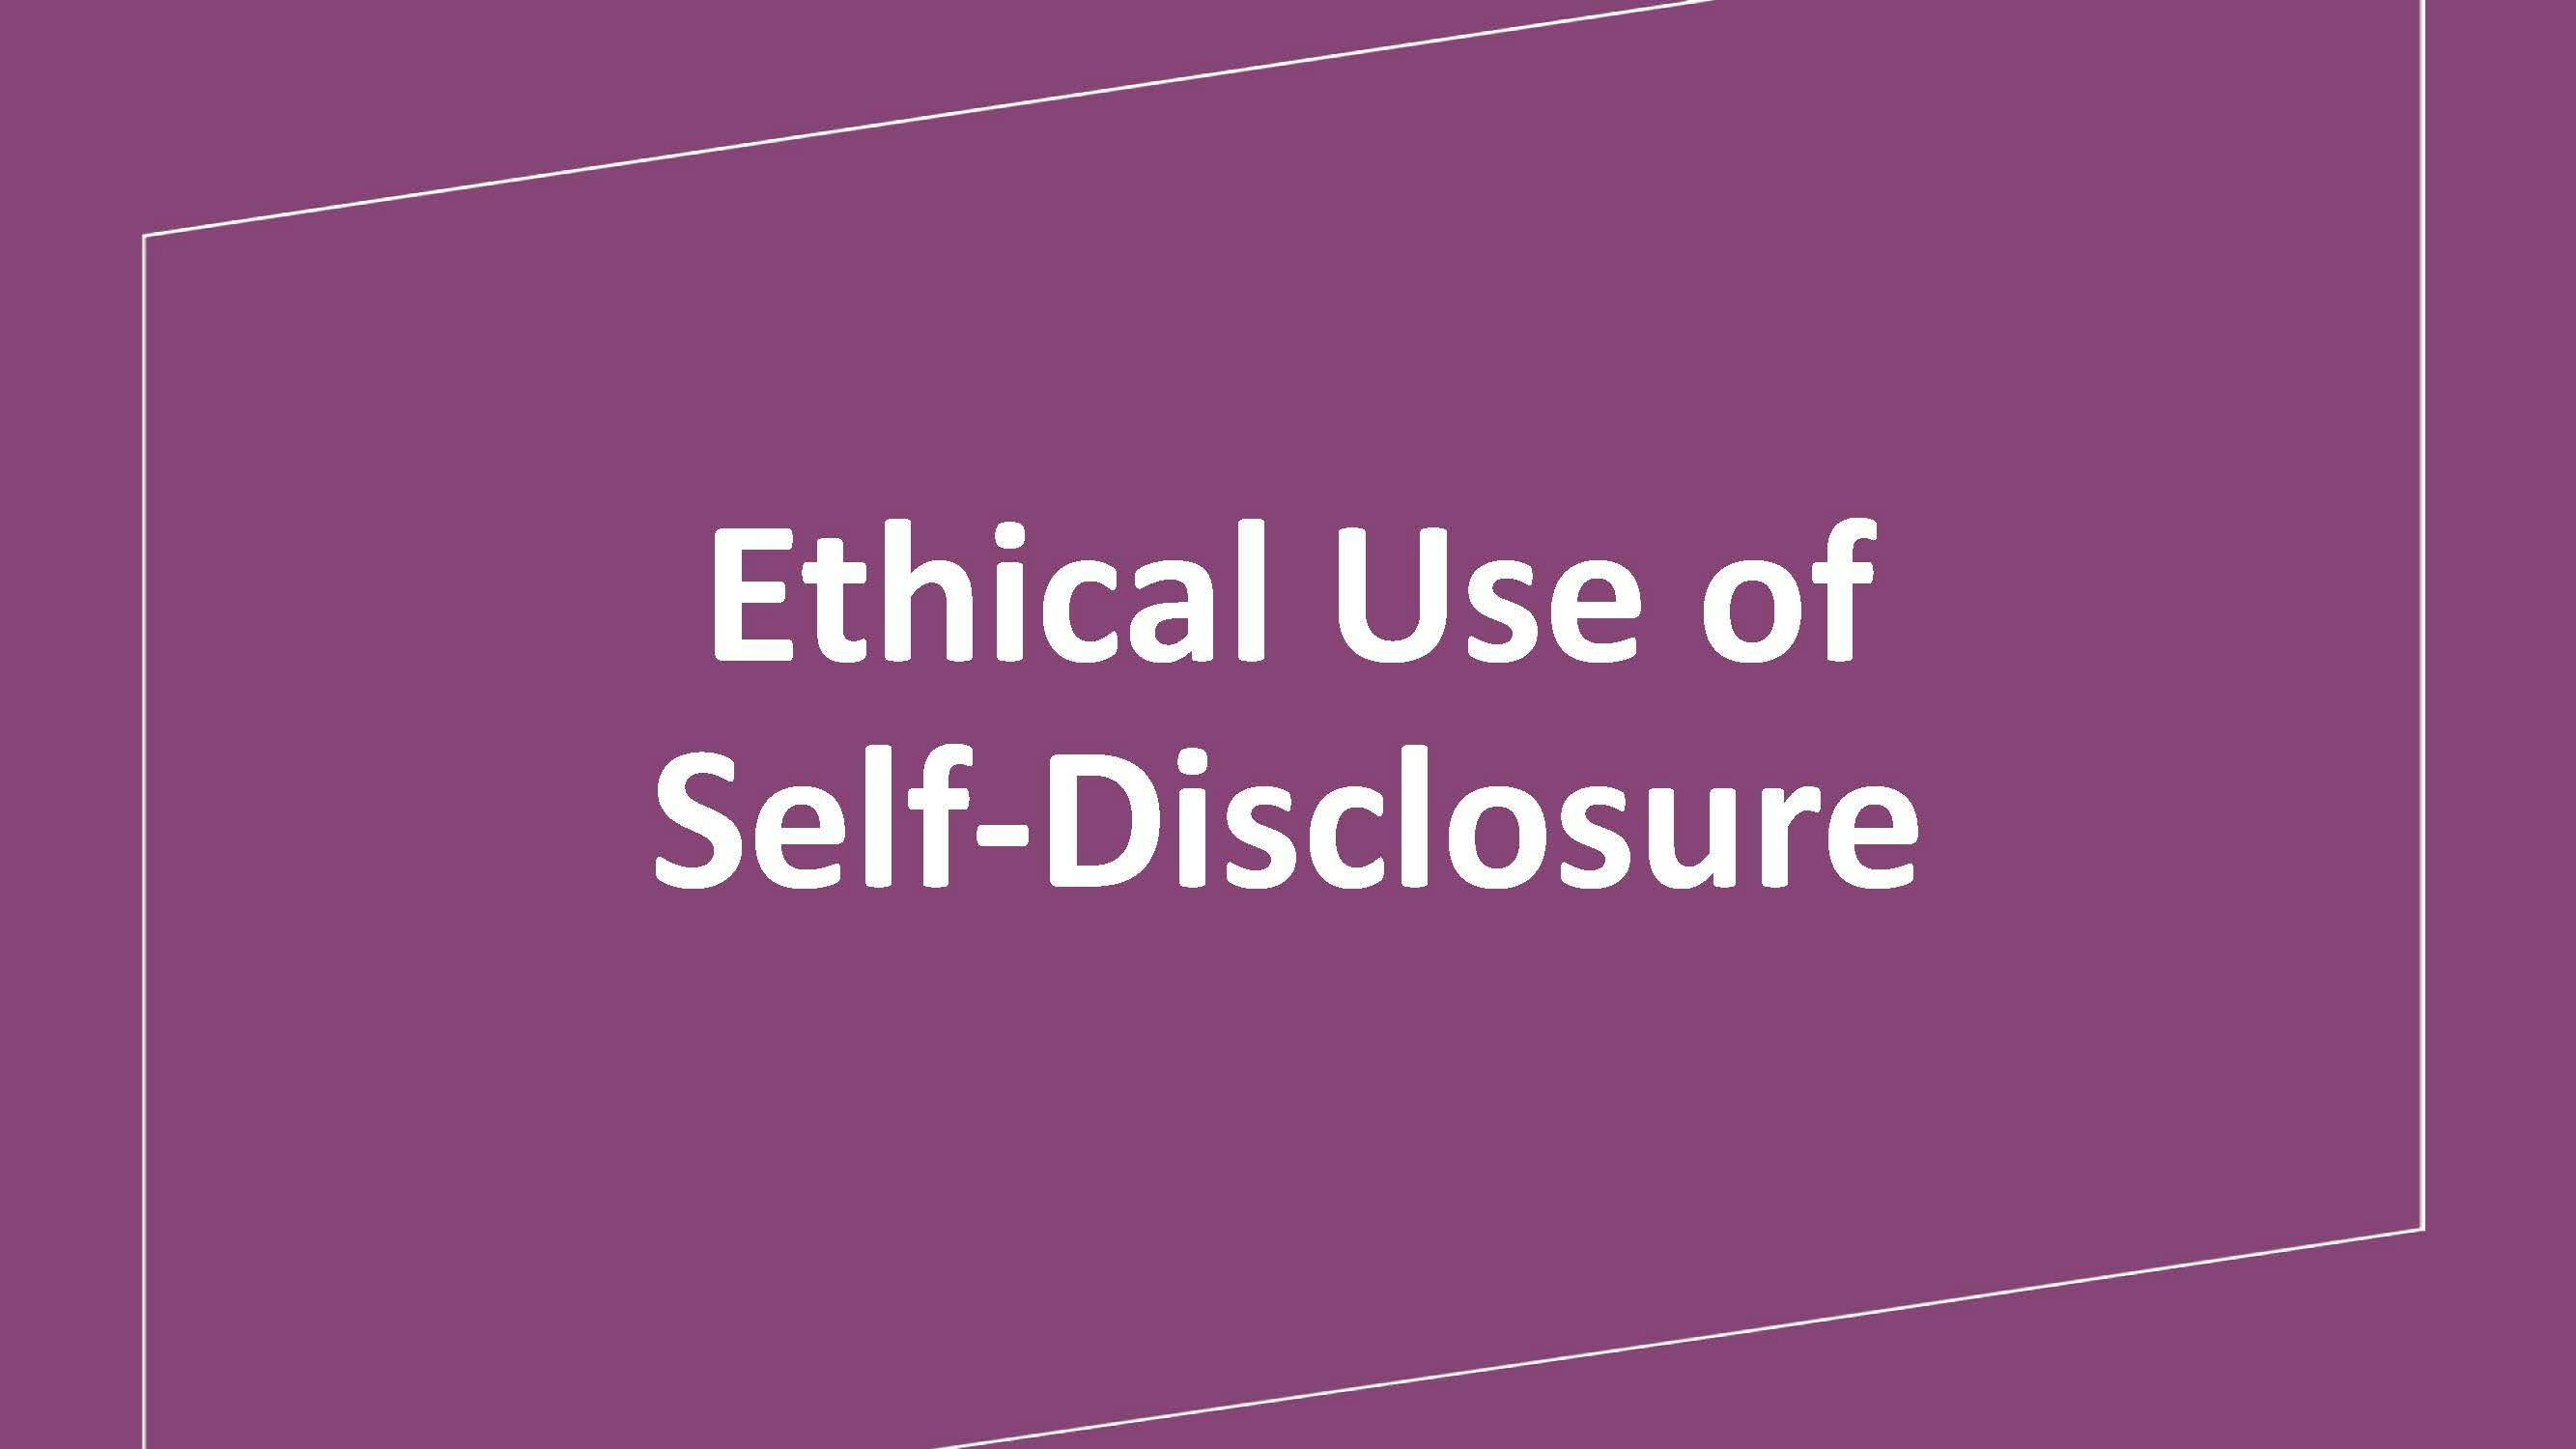 Ethical Use of Self-Disclosure